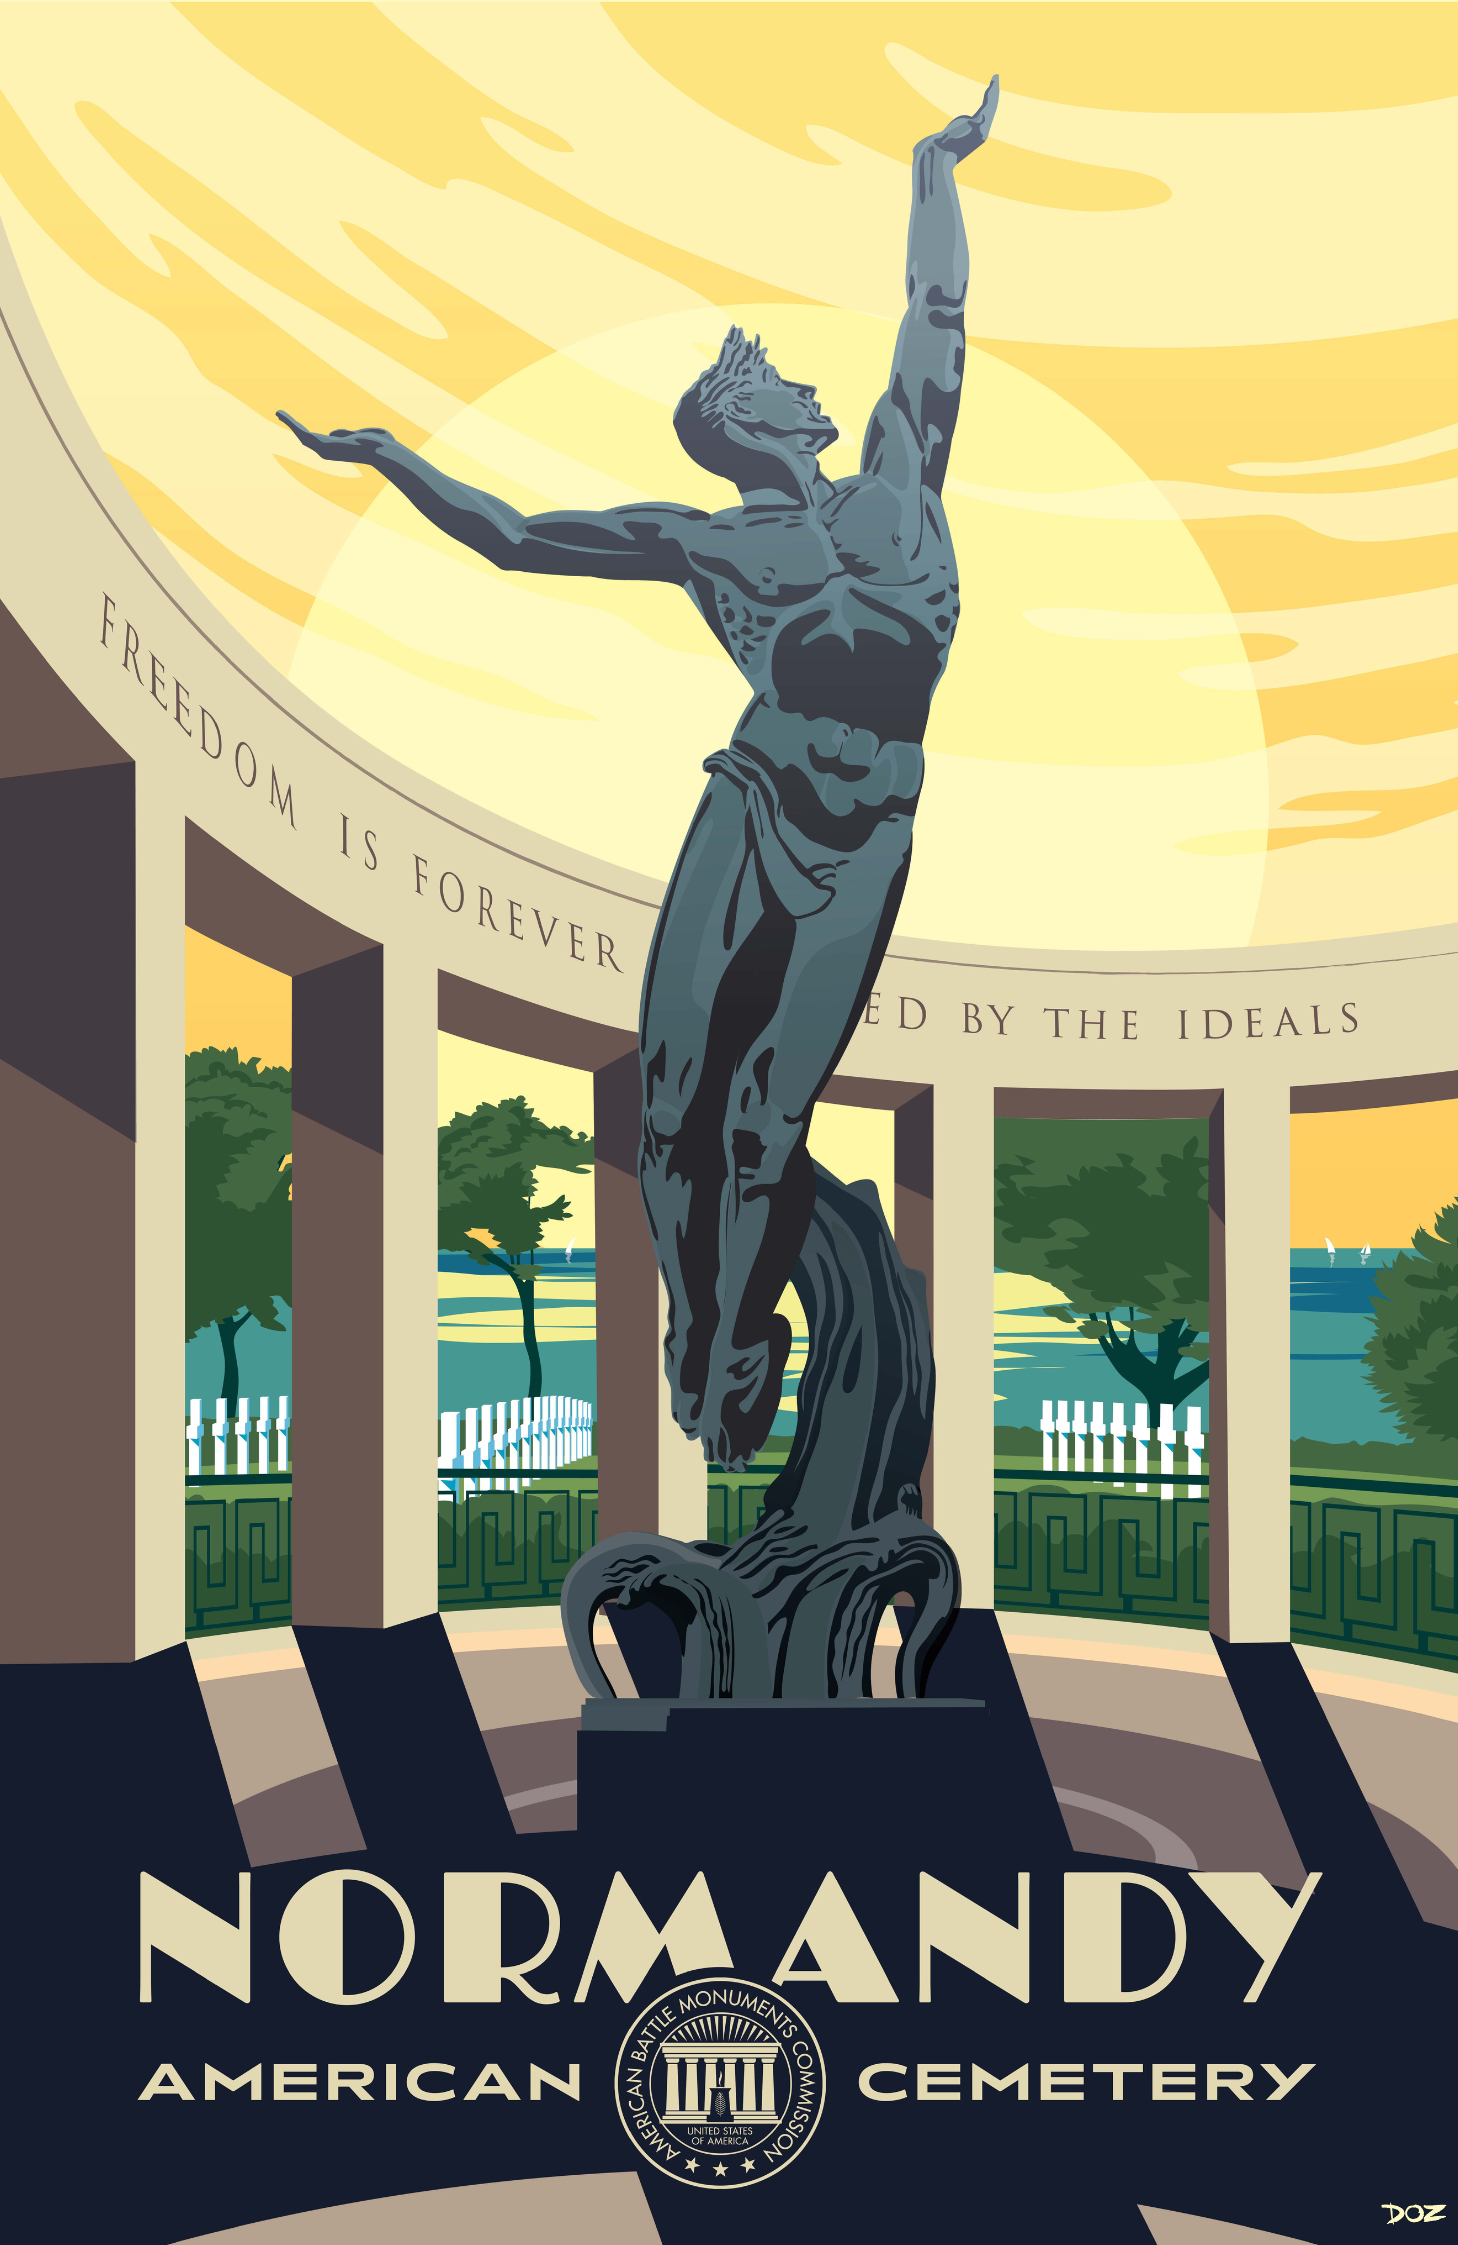 Vintage poster of Normandy American Cemetery created to mark ABMC Centennial